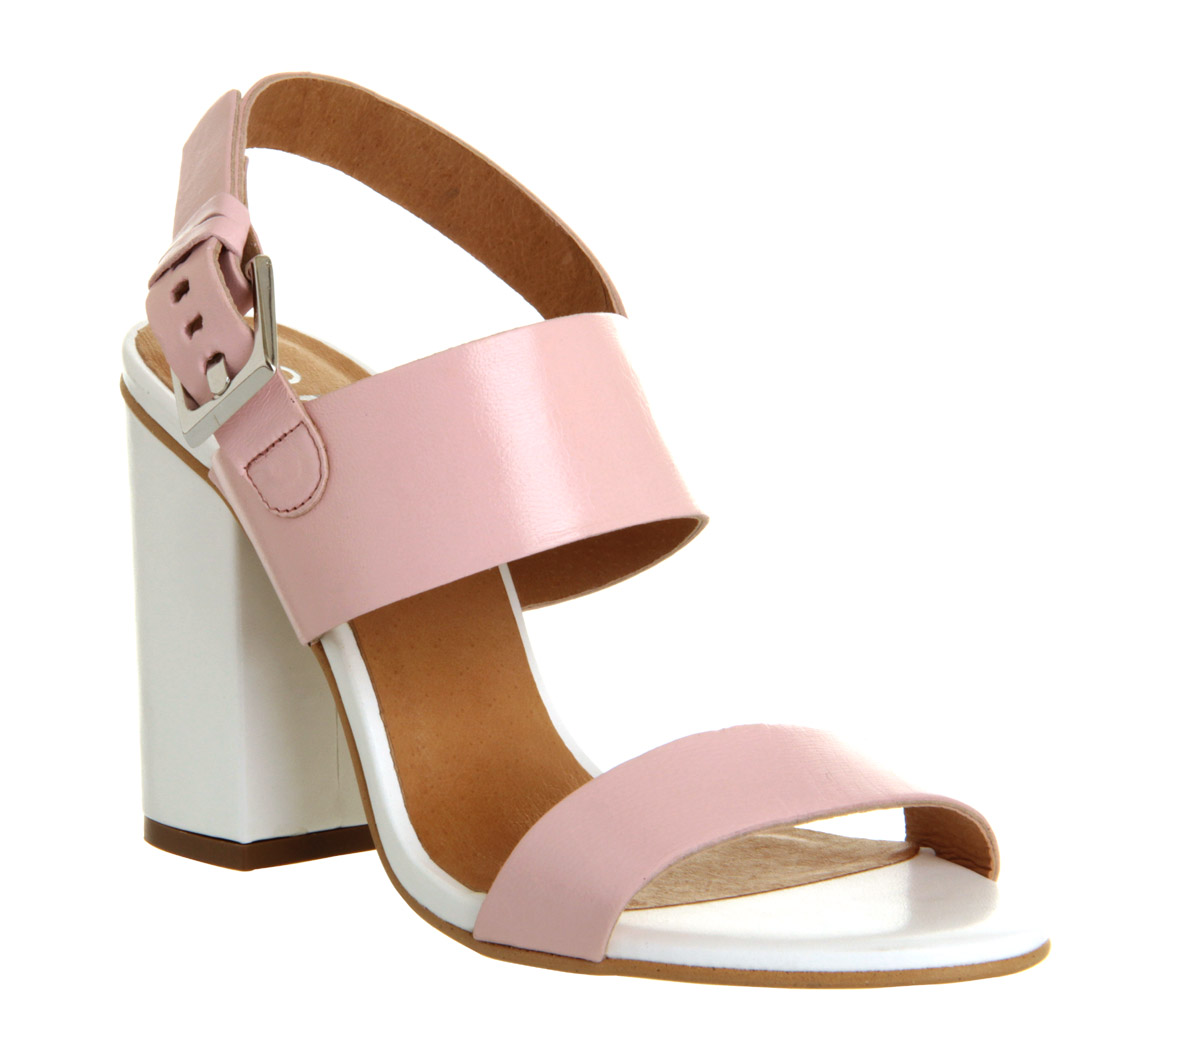 OFFICEGarland Strappy Block HeelPale Pink Leather